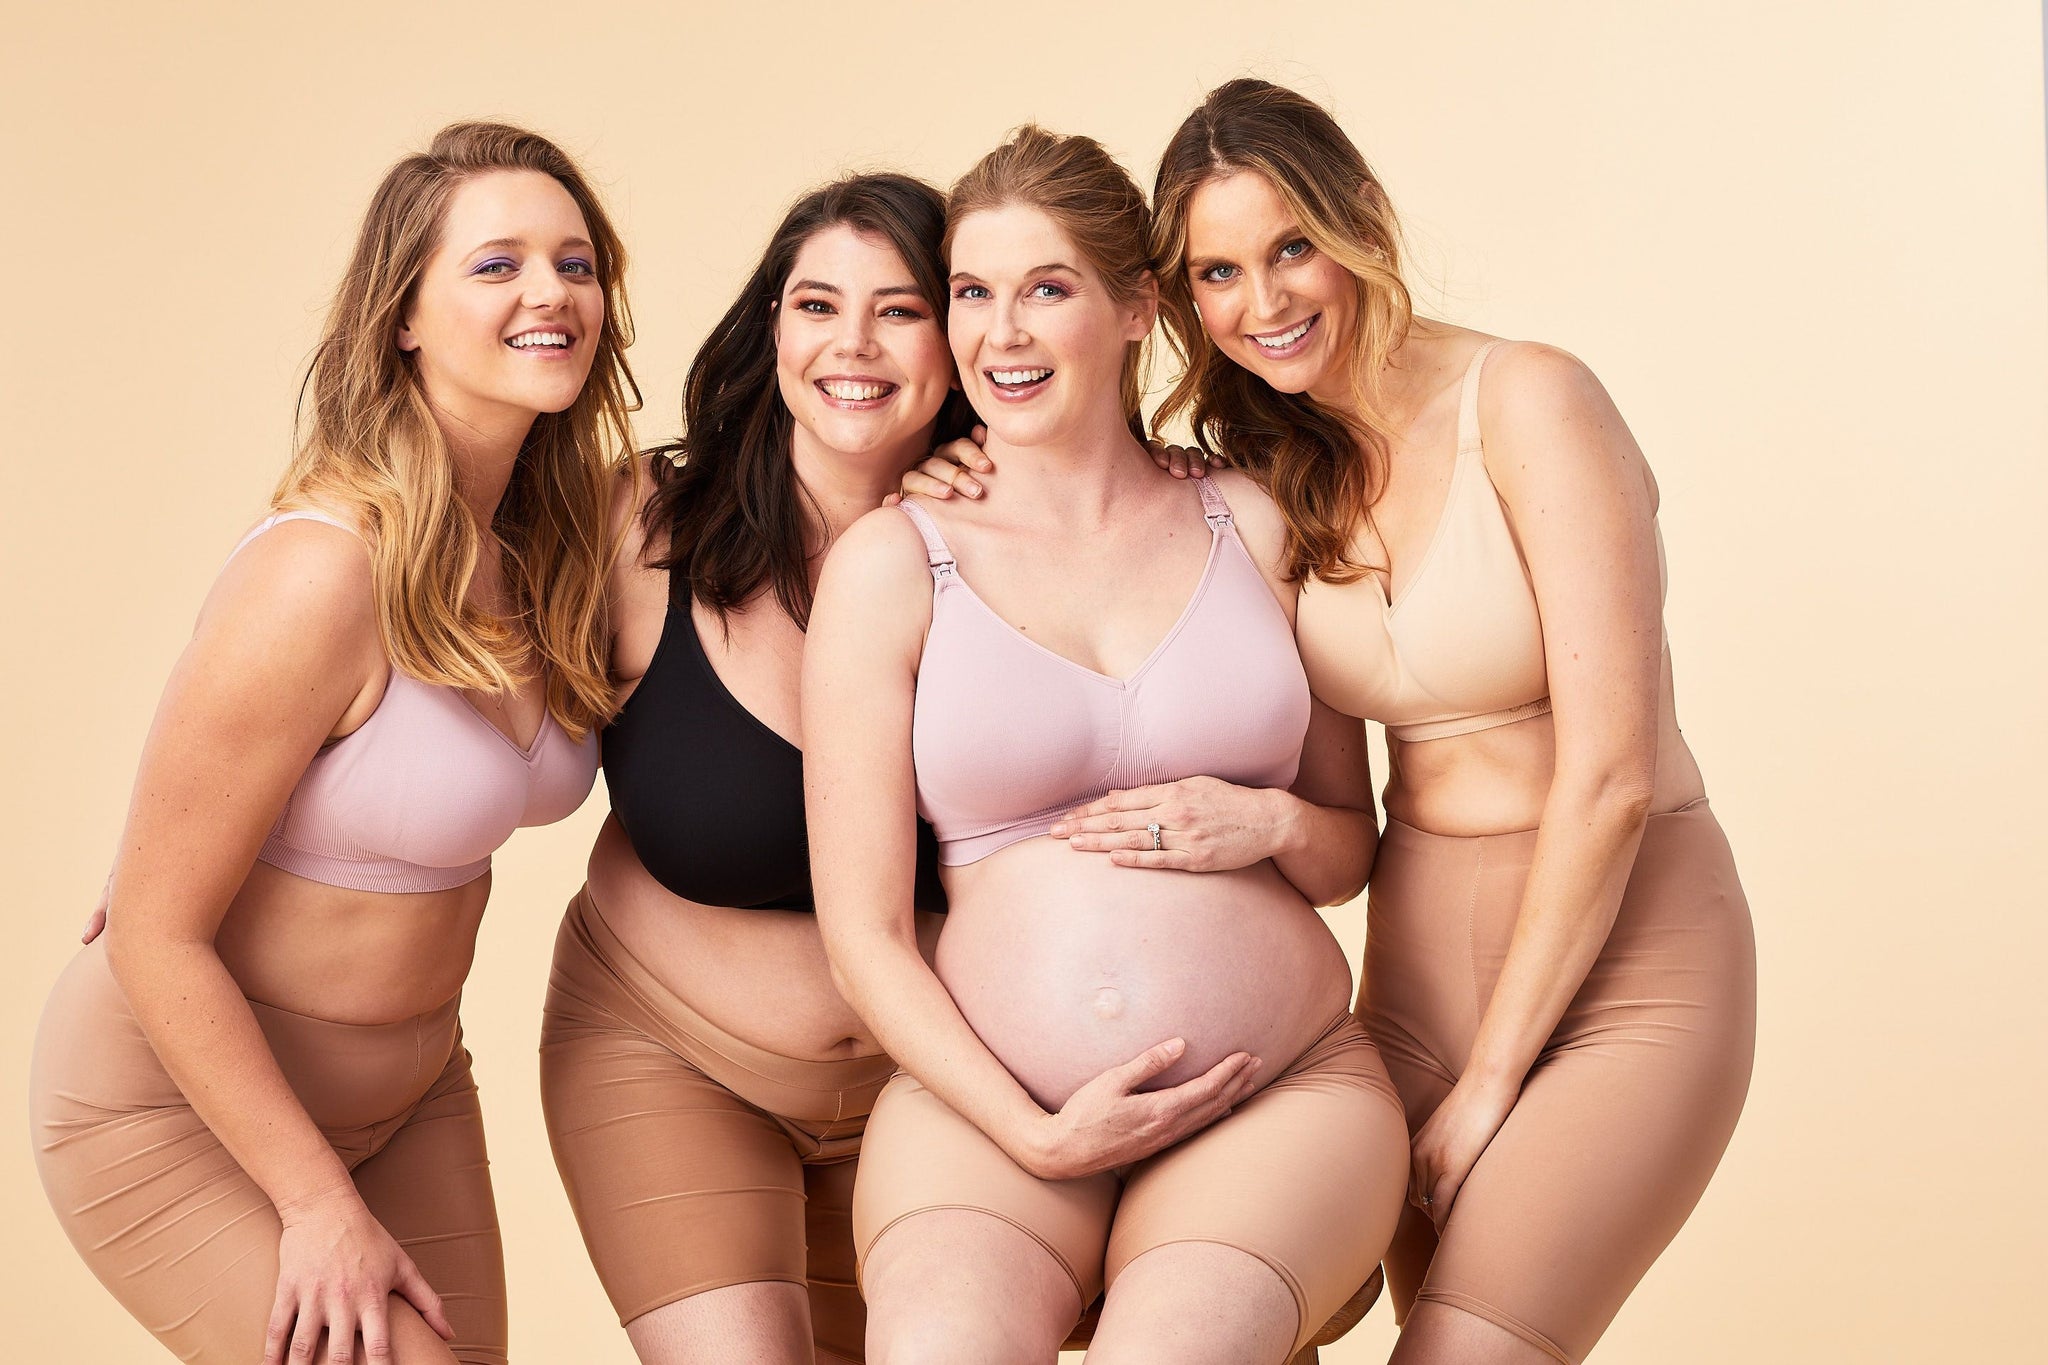 5 Most Essential Maternity Bra Features To Look Out For (That your